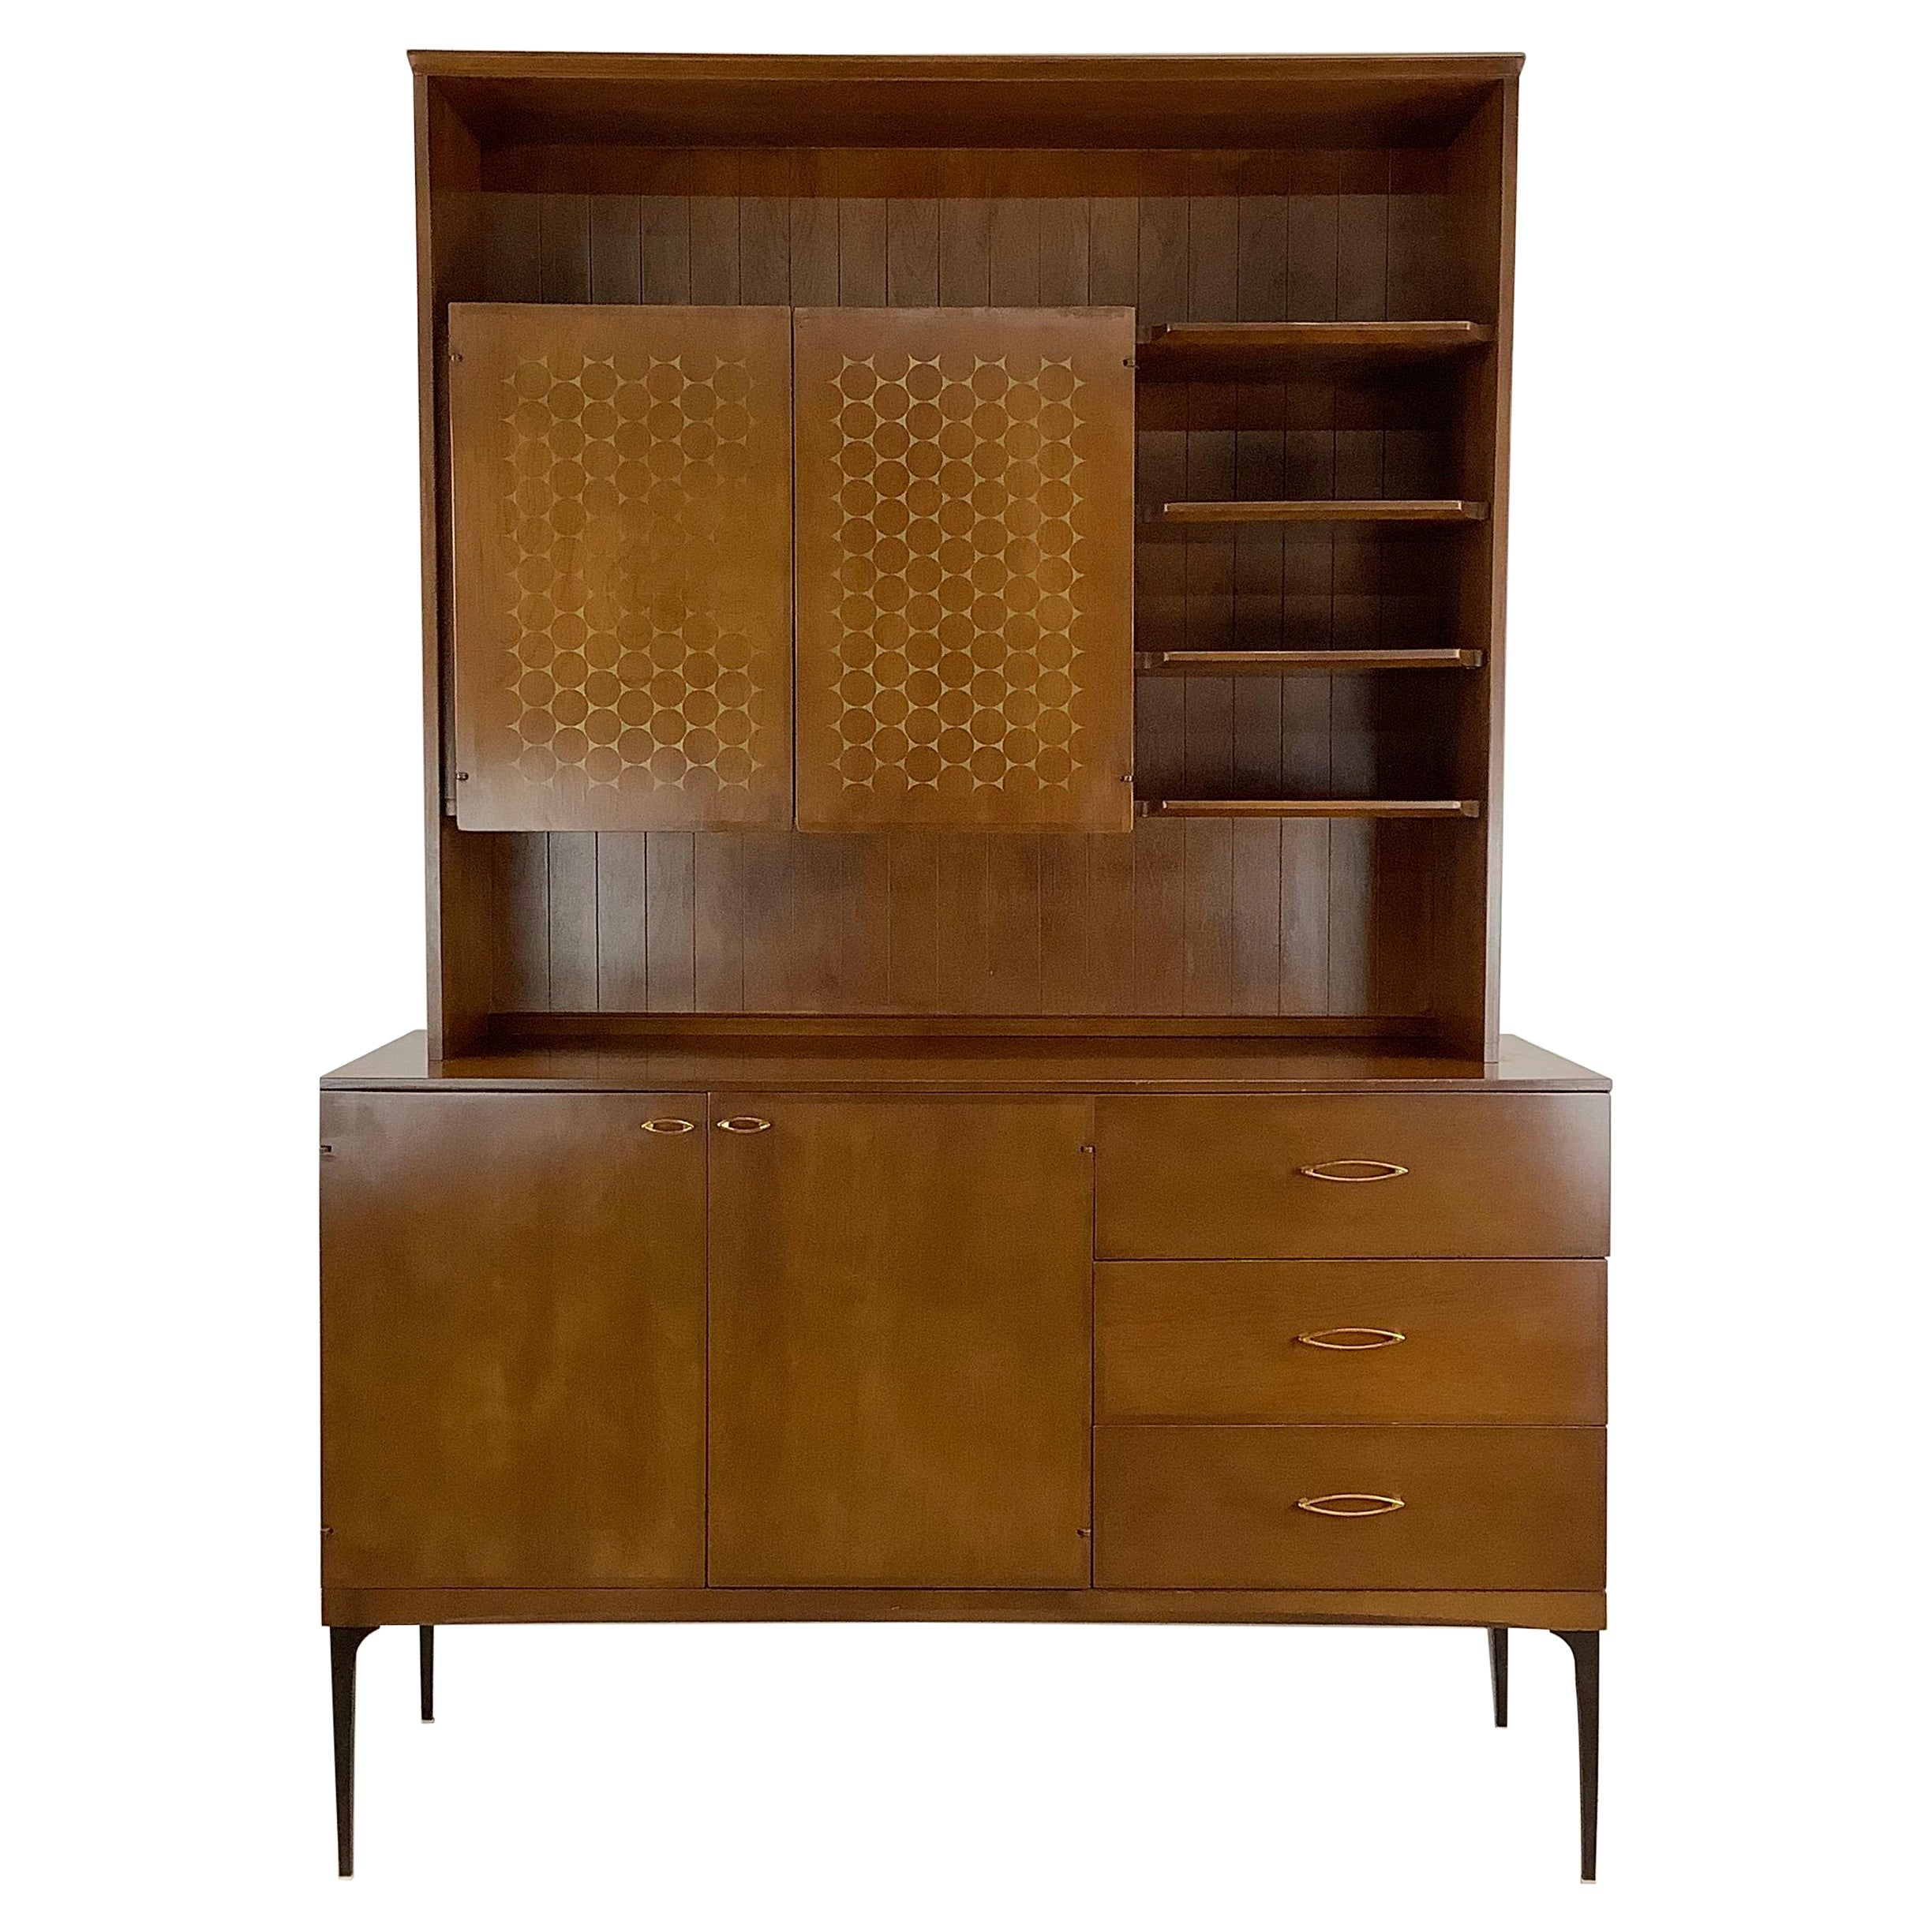 Rare Heywood Wakefield "Contessa" Sideboard With Hutch by Carl Otto